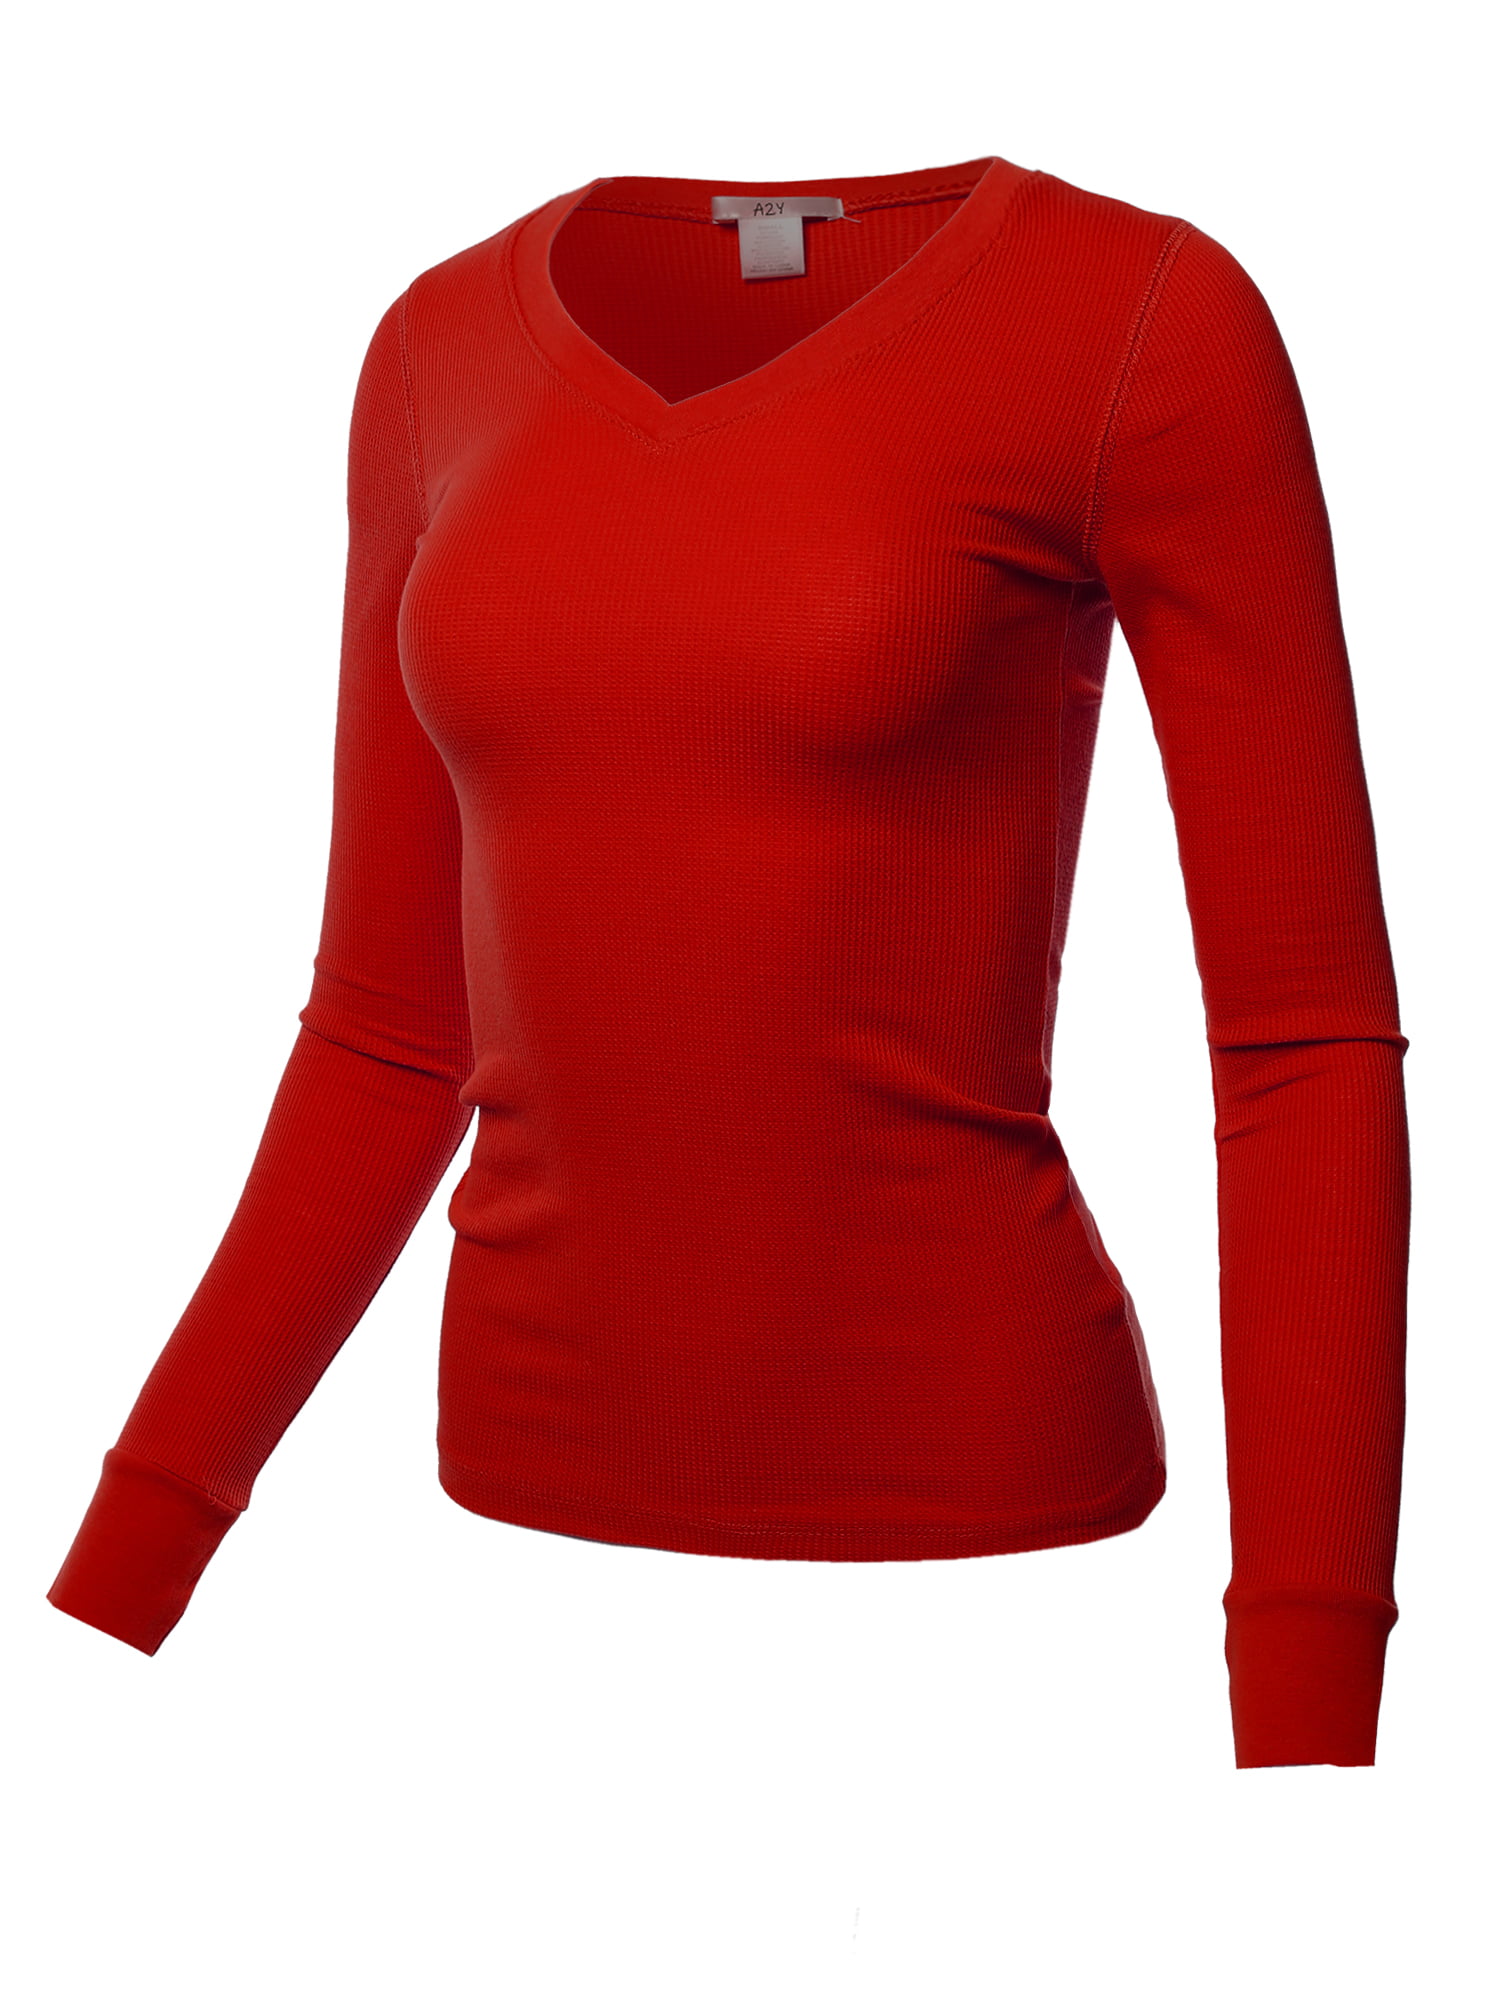 Red Fitted Basic Scarlet A2Y Shirt Women\'s Sleeve 3XL Top V-Neck Solid Long Thermal